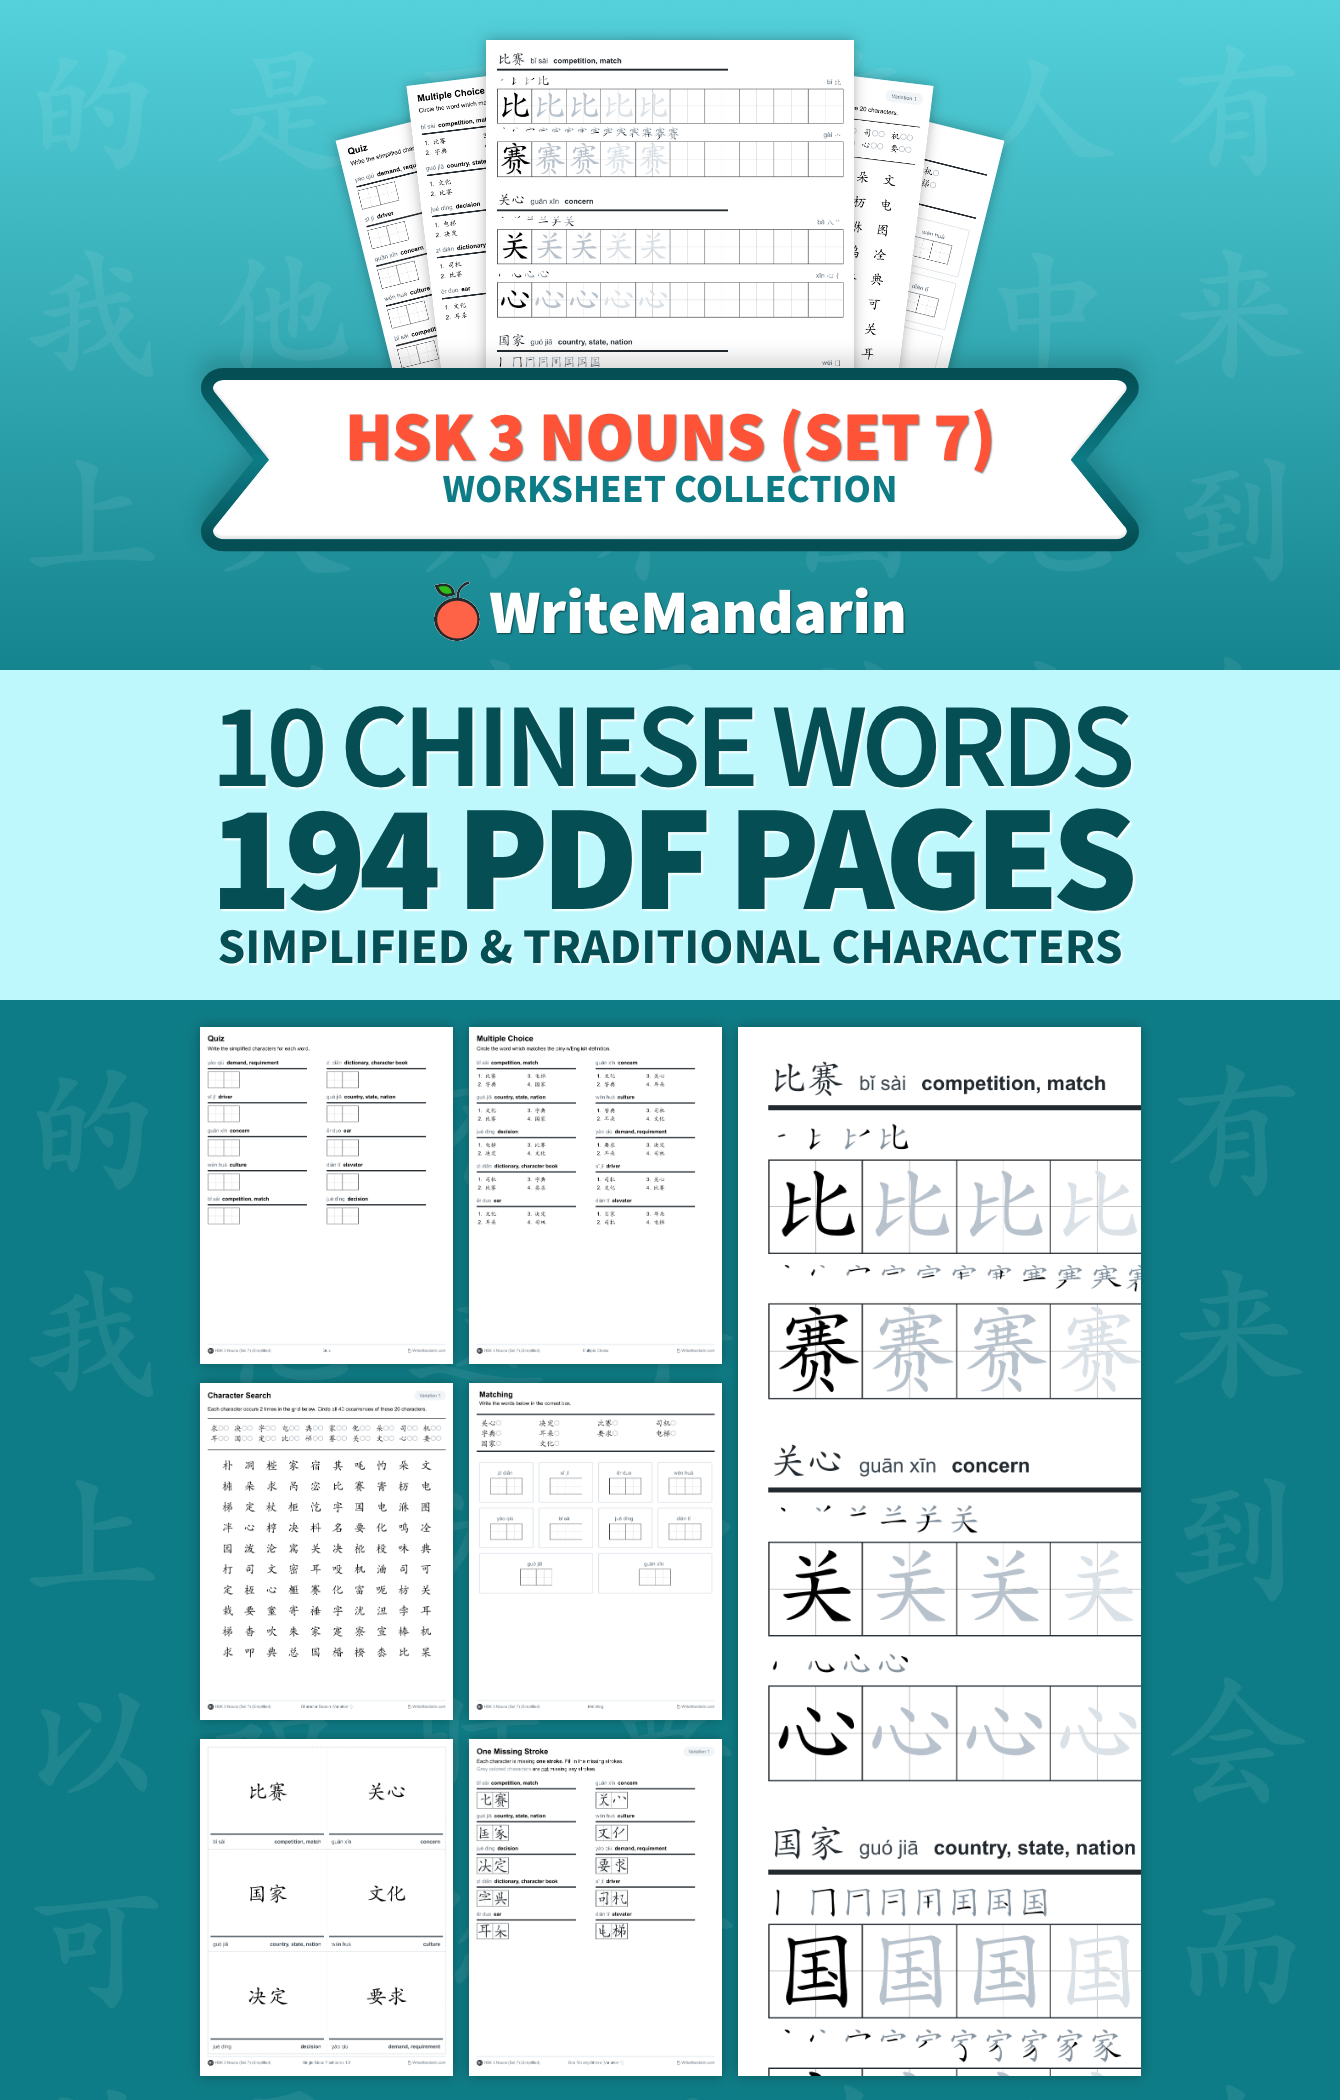 Preview image of HSK 3 Nouns (Set 7) worksheet collection